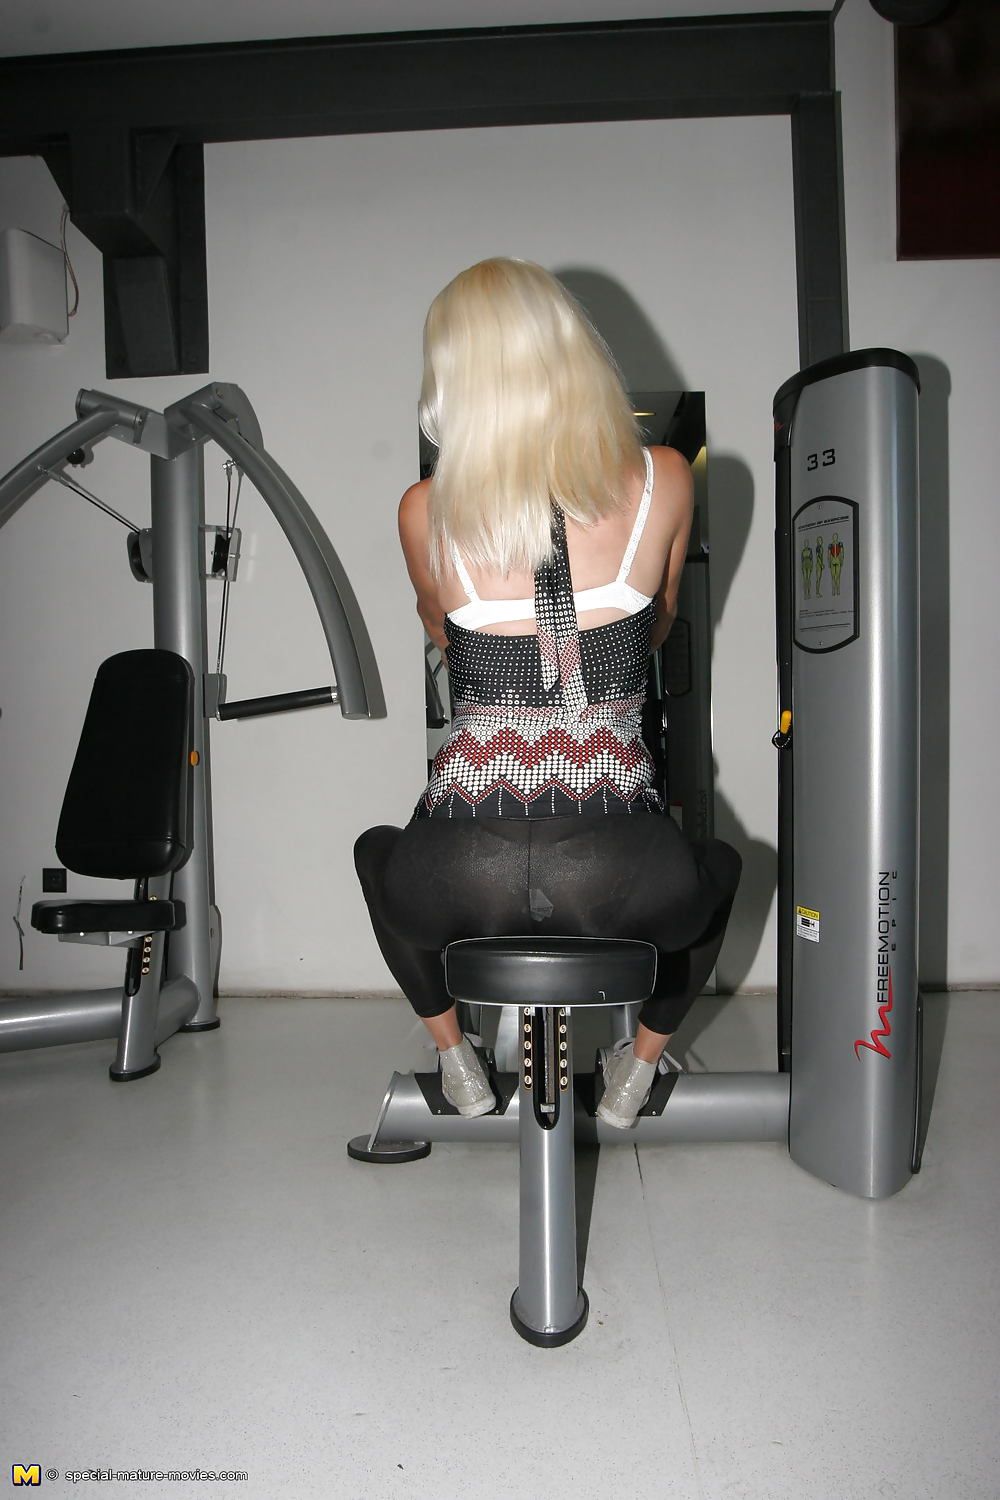 Naked Mature Mothers do Naked Exercises at Gym PART 2 #32